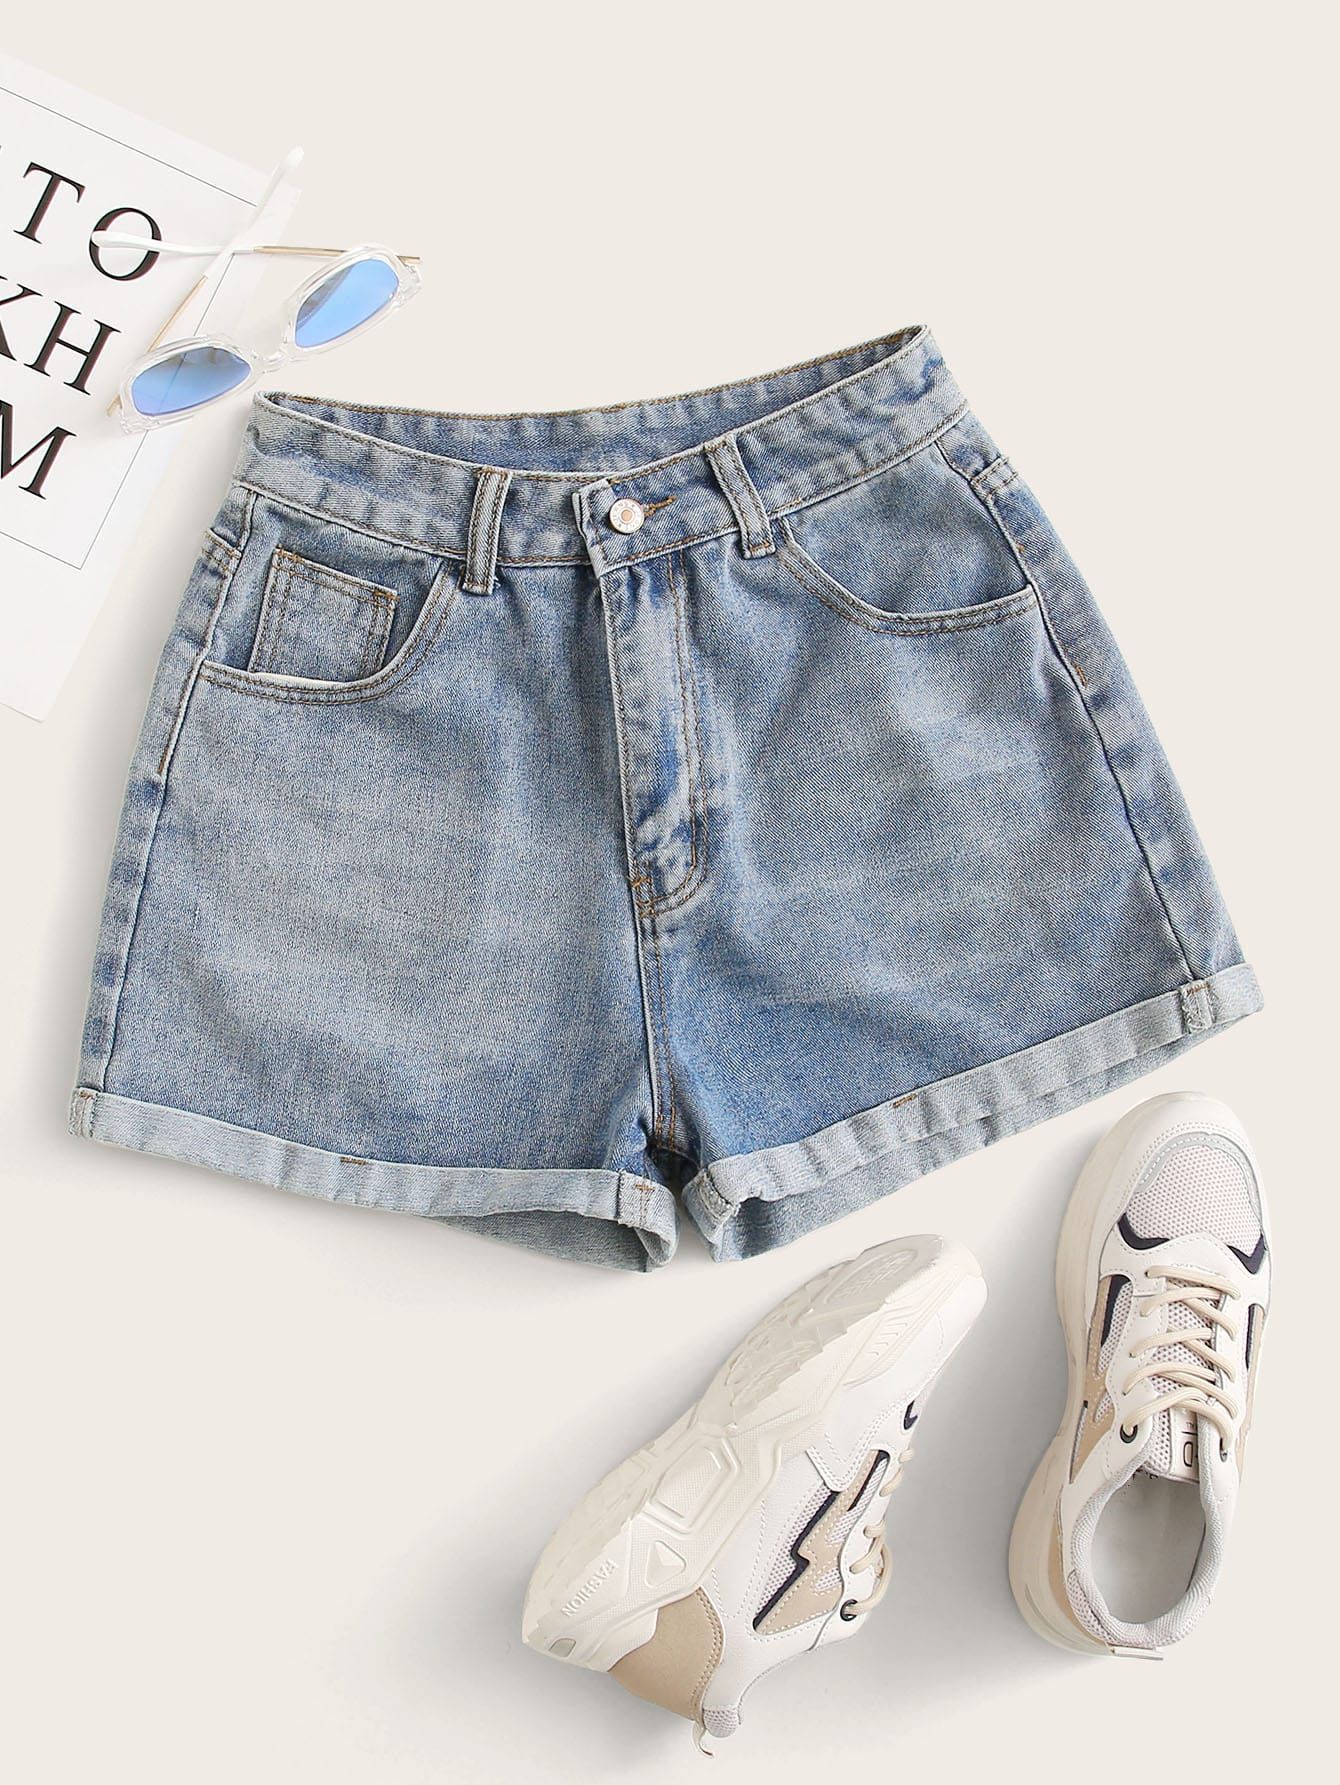 How to Wear Blue Jean Shorts: Best 13 Casual & Stylish Outfits for Women